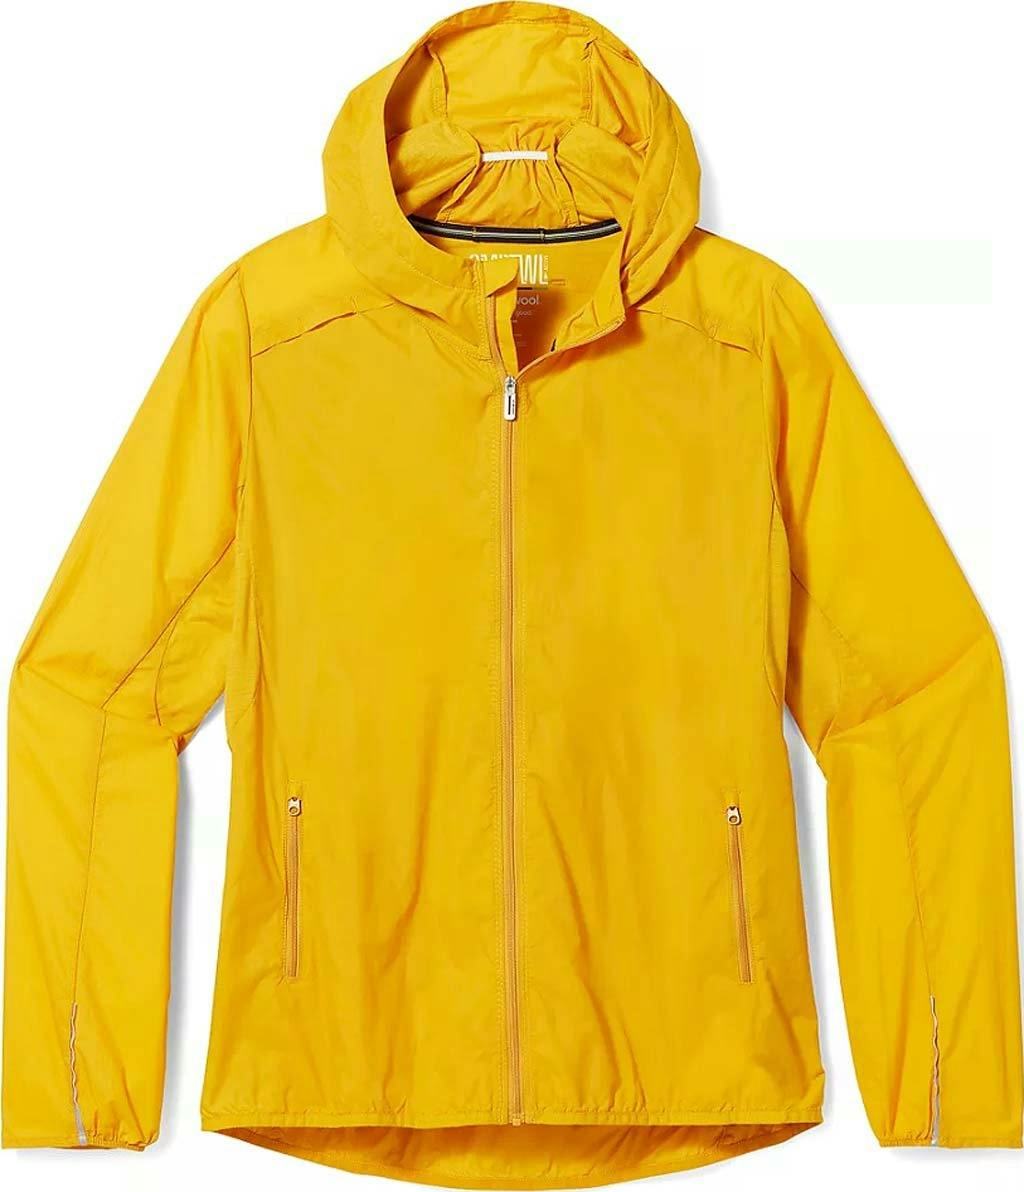 Product image for Active Ultralite Hoodie Jacket - Women's